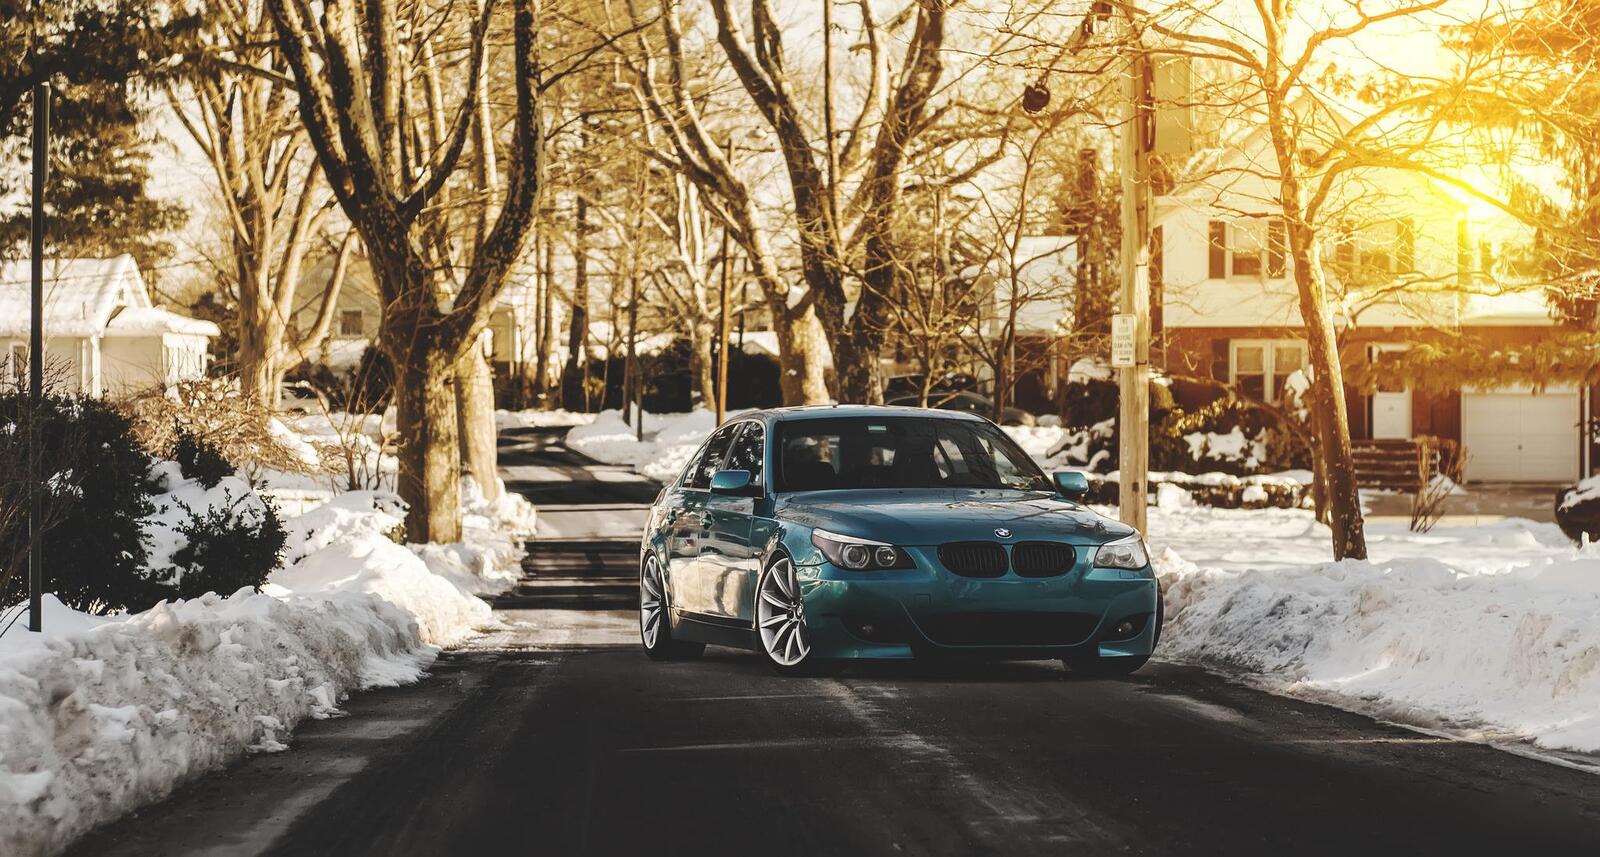 Free photo BMW E60 on a country winter road